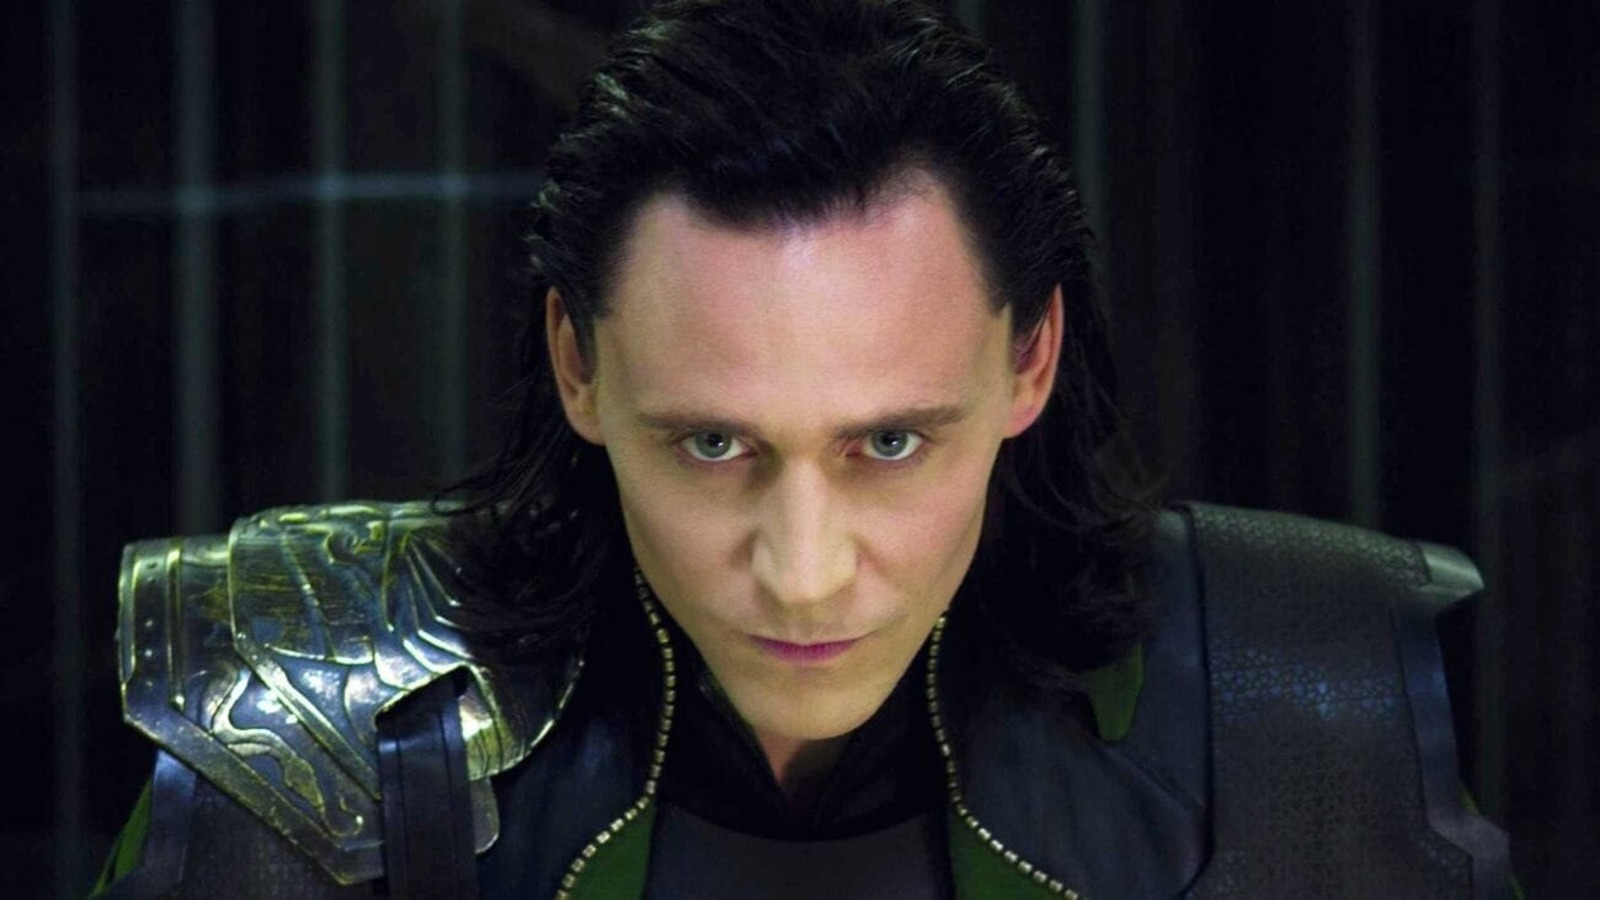 Tom Hiddleston's Best And Worst On-Screen Performances To Date